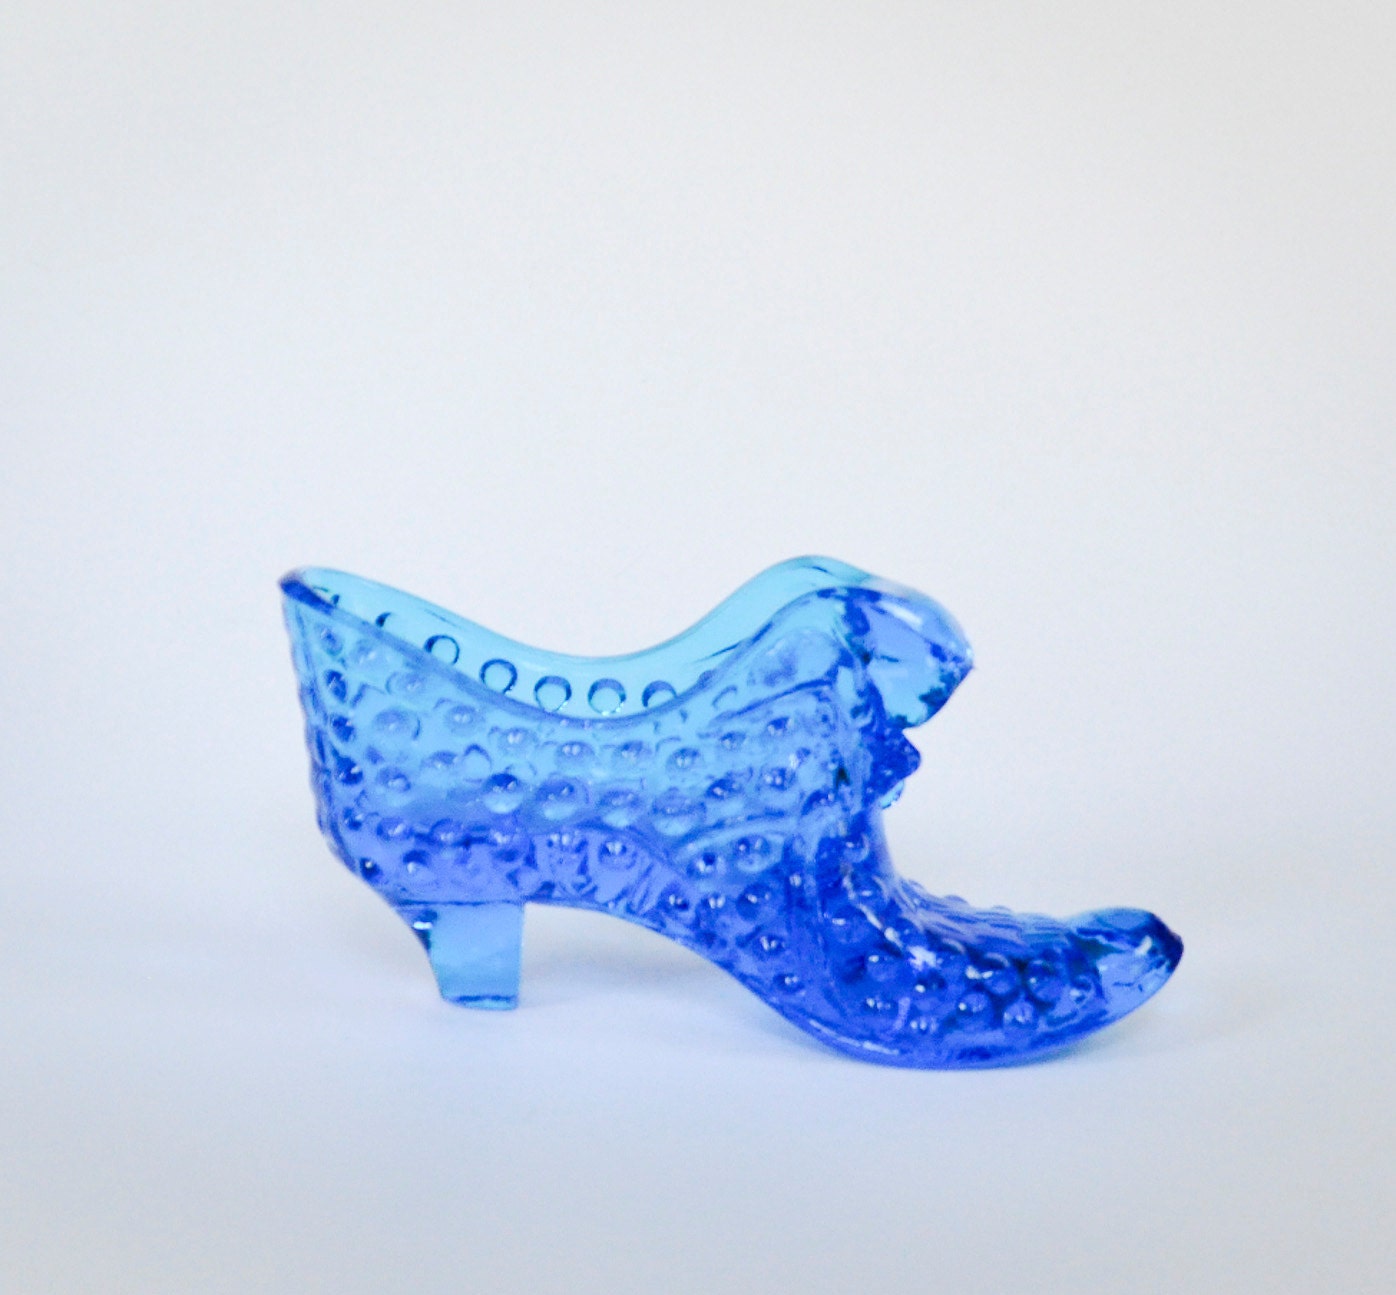 Cobalt Blue Fenton Glass Shoe by OllyOxes on Etsy